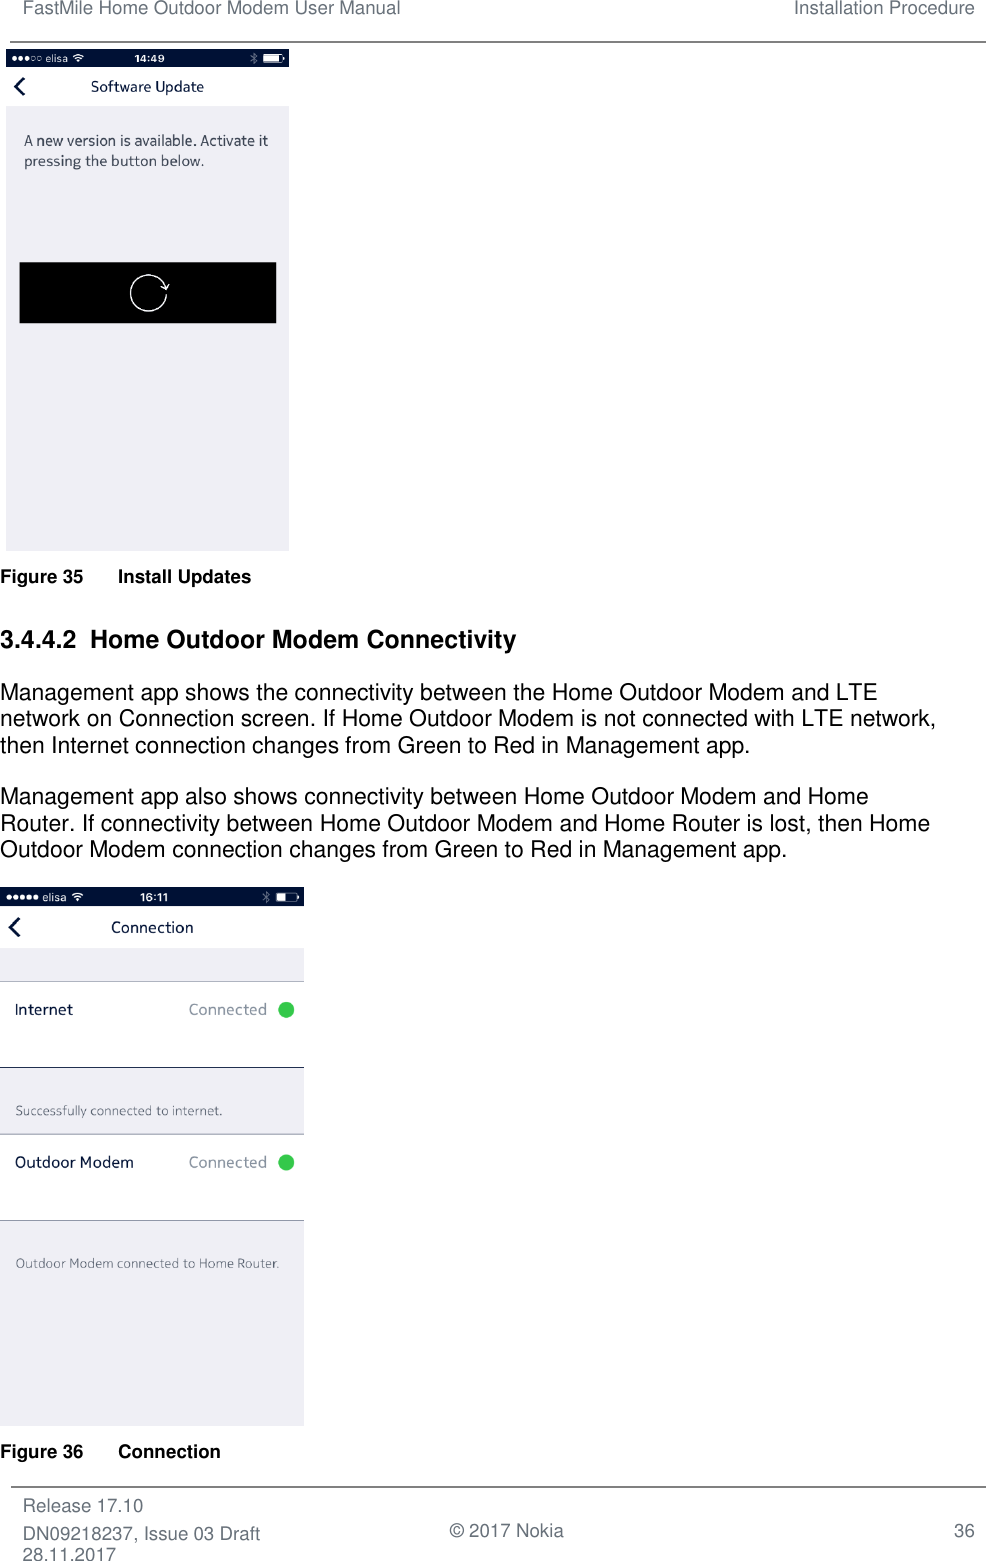 FastMile Home Outdoor Modem User Manual Installation Procedure  Release 17.10 DN09218237, Issue 03 Draft 28.11.2017                                © 2017 Nokia 36     Figure 35  Install Updates 3.4.4.2  Home Outdoor Modem Connectivity Management app shows the connectivity between the Home Outdoor Modem and LTE network on Connection screen. If Home Outdoor Modem is not connected with LTE network, then Internet connection changes from Green to Red in Management app. Management app also shows connectivity between Home Outdoor Modem and Home Router. If connectivity between Home Outdoor Modem and Home Router is lost, then Home Outdoor Modem connection changes from Green to Red in Management app.  Figure 36  Connection 